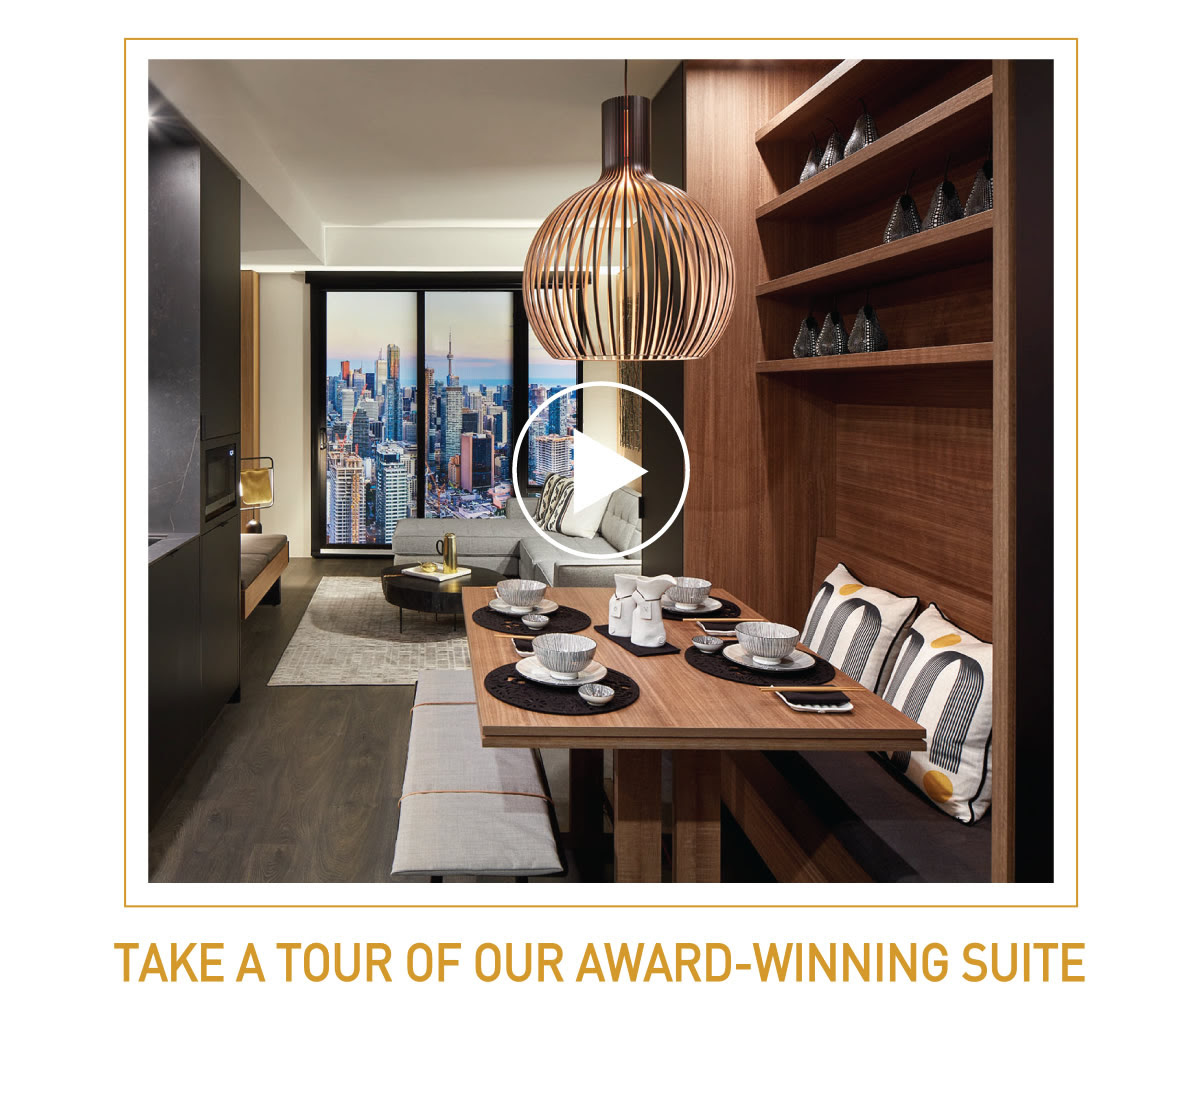 TAKE A TOUR OF OUR AWARD WINNING SUITE